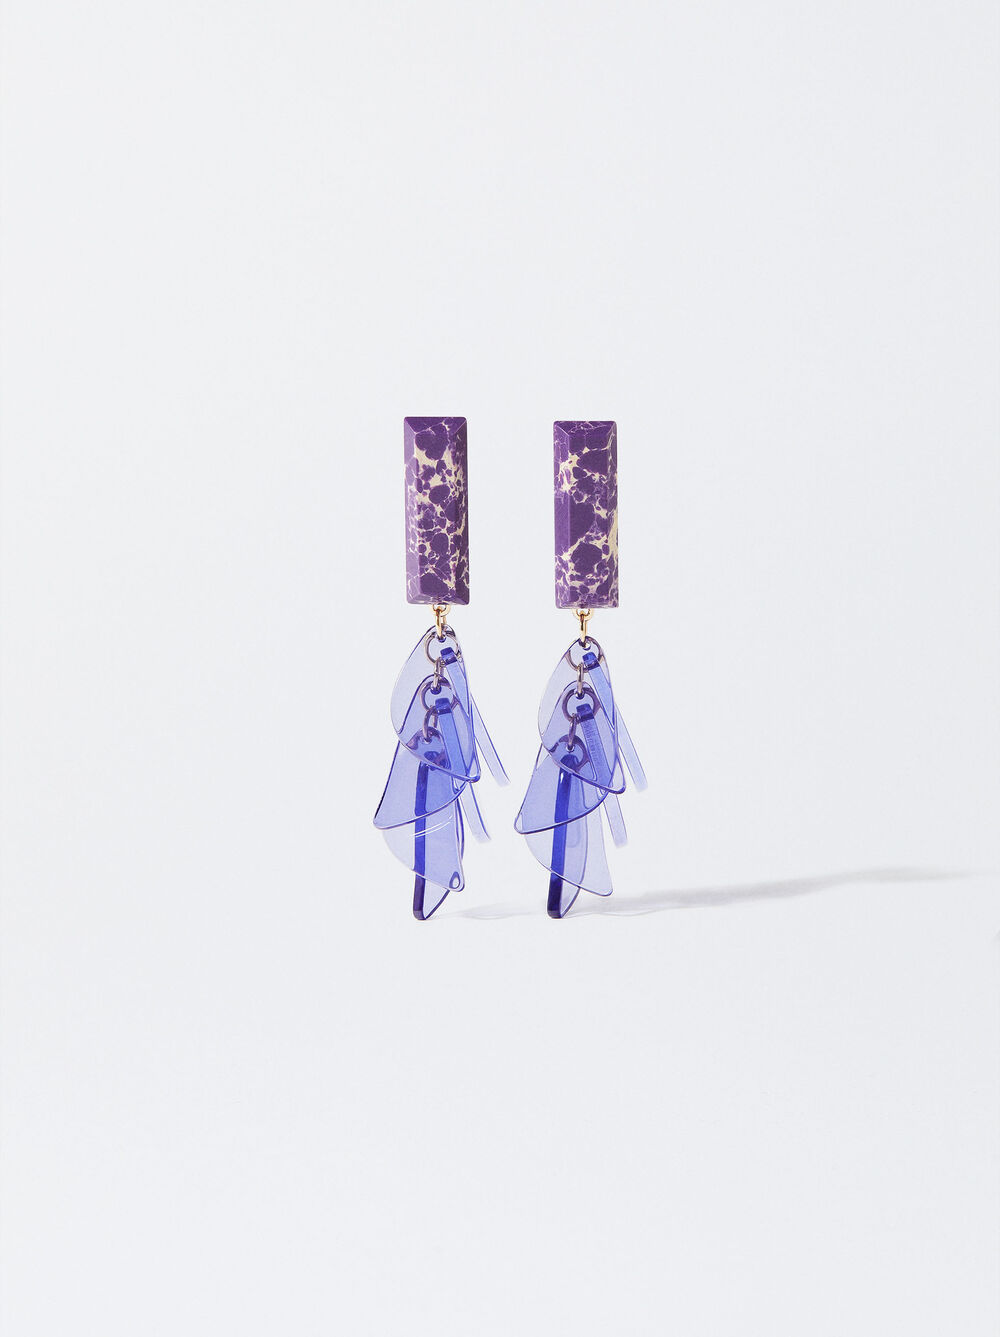 Earrings With Stone And Resin